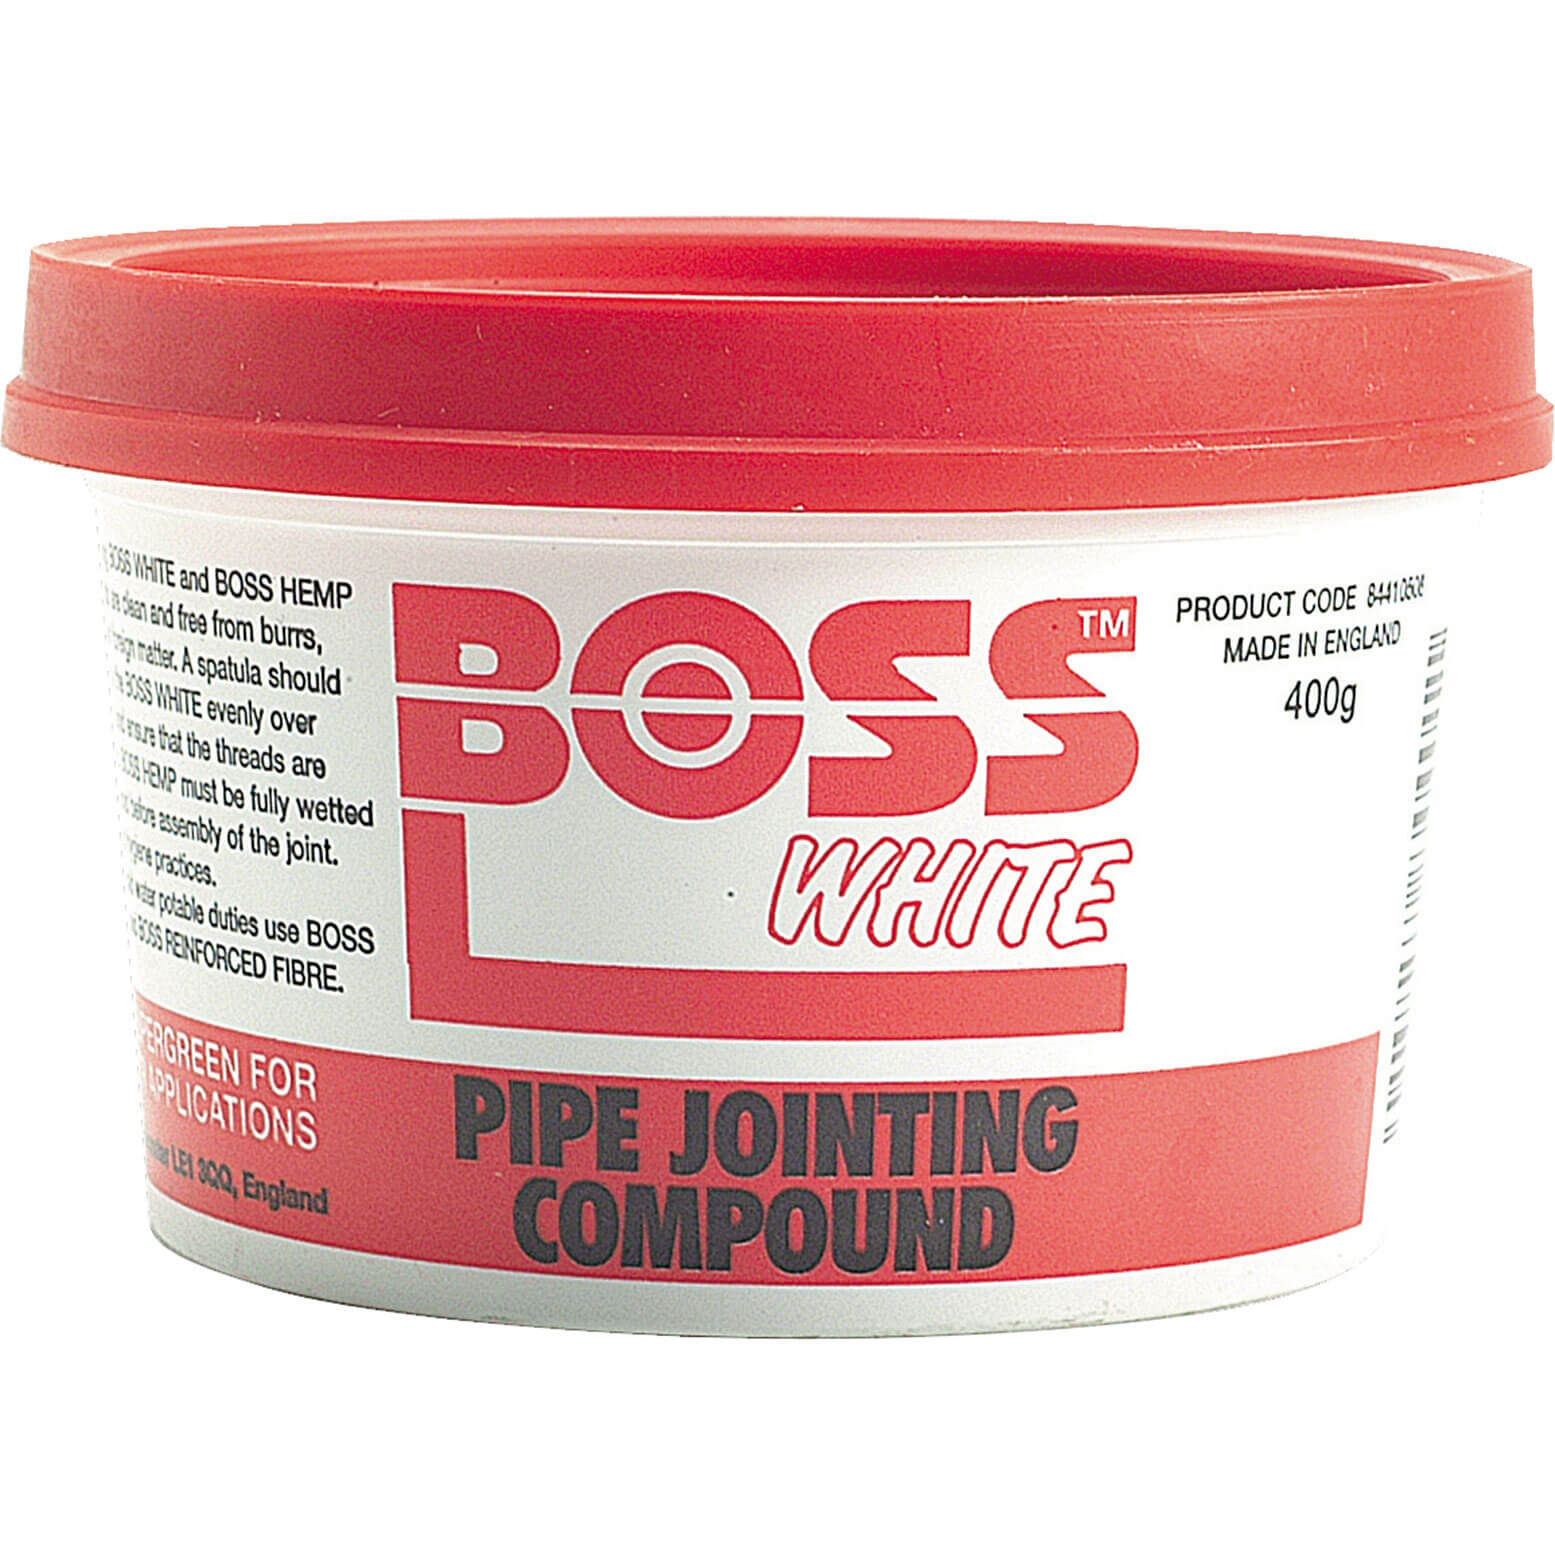 Image of Boss White Pipe Jointing Compound 400g